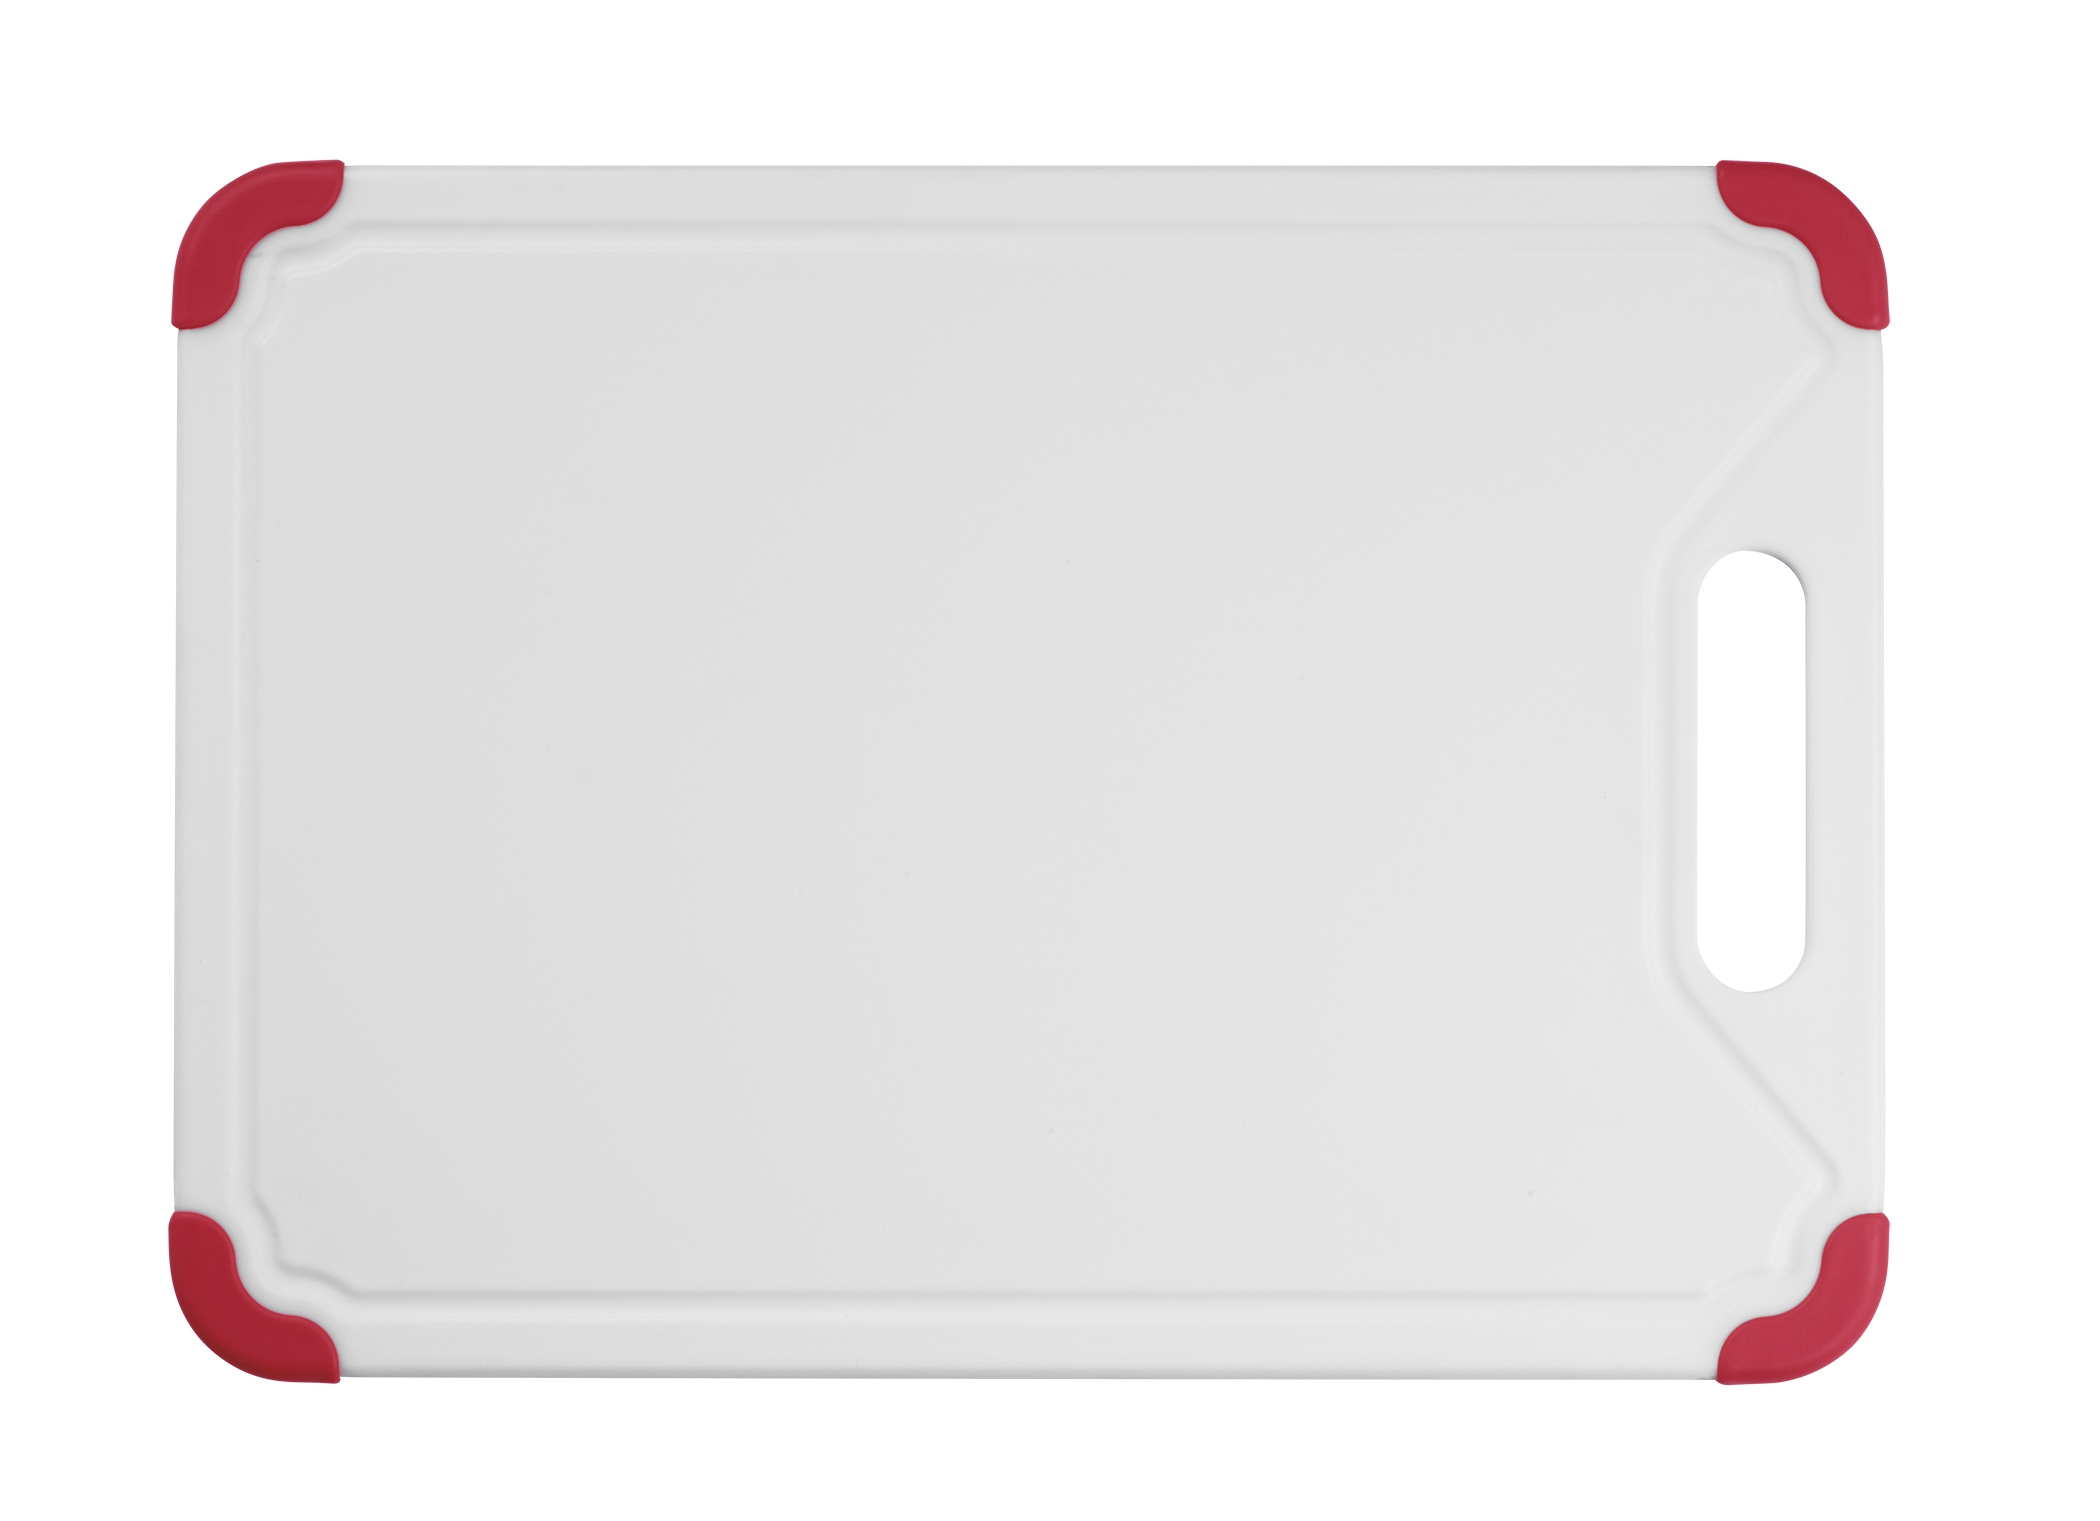 Cuisinart Cpb-13wr 13 Board with Red Trim, White